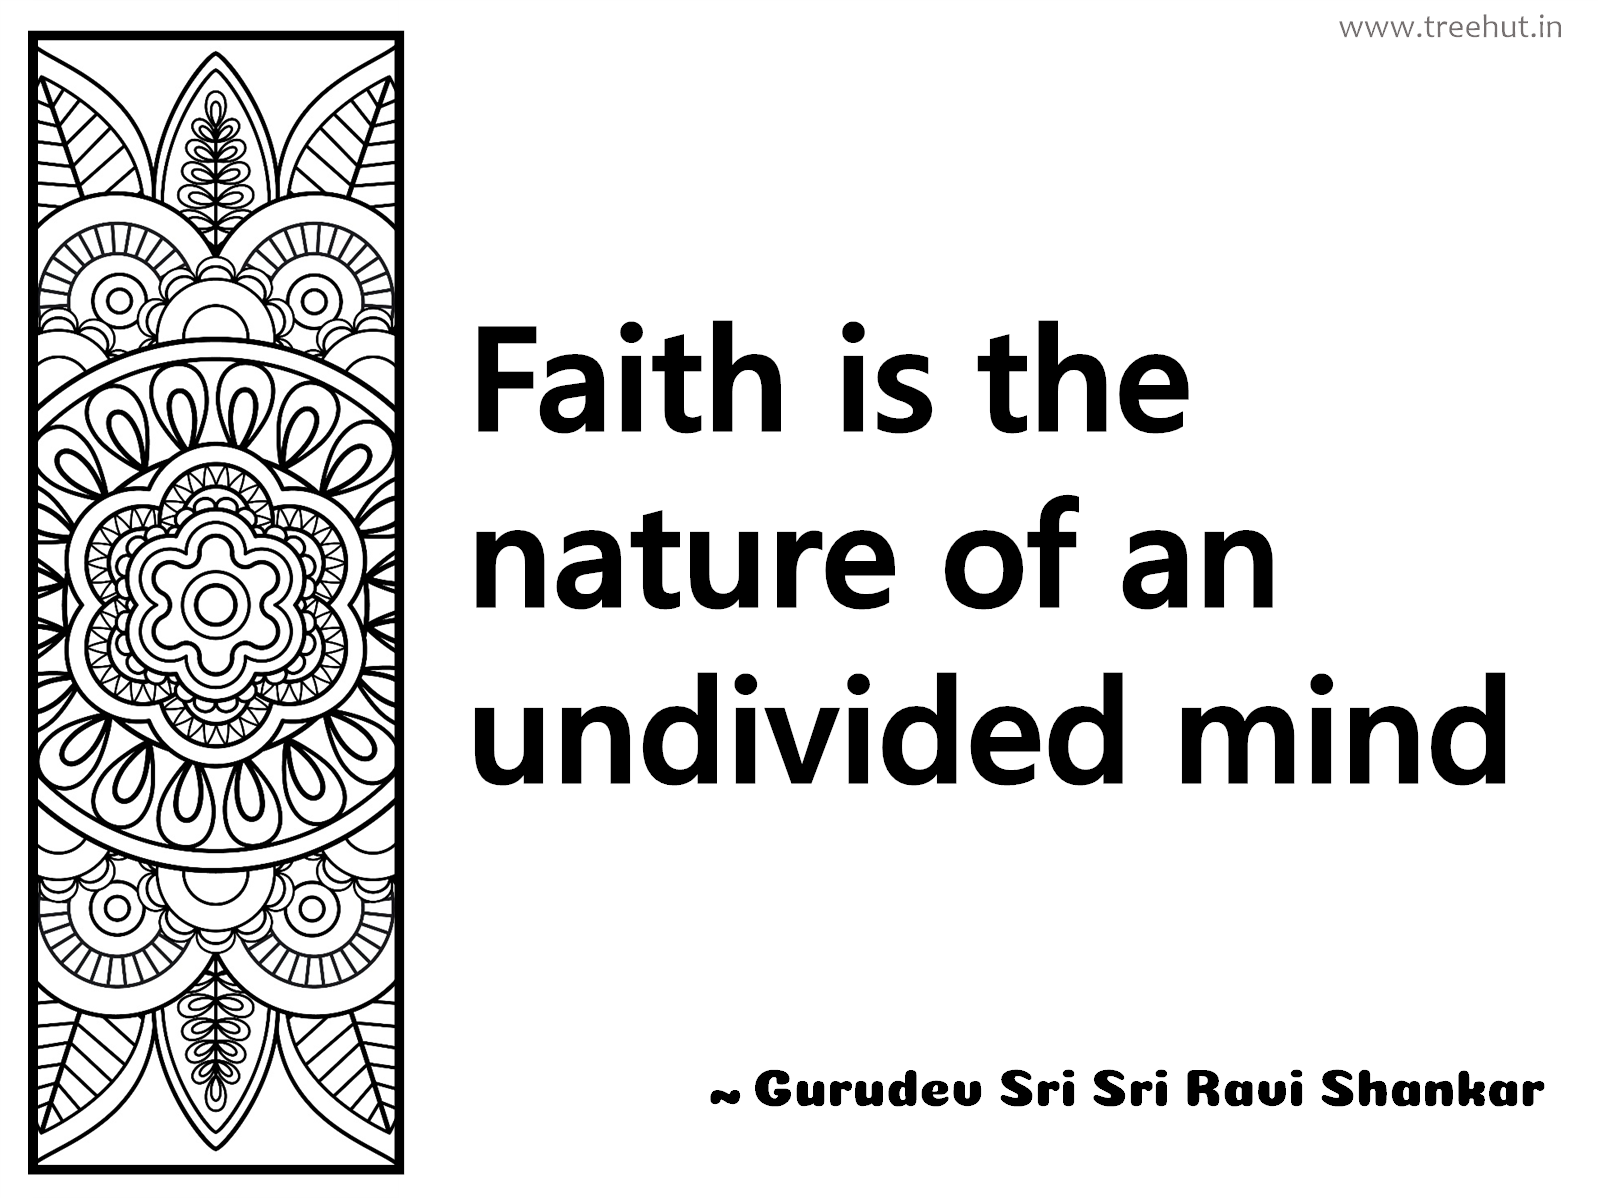 Faith is the nature of an undivided mind Inspirational Quote by Gurudev Sri Sri Ravi Shankar, coloring pages